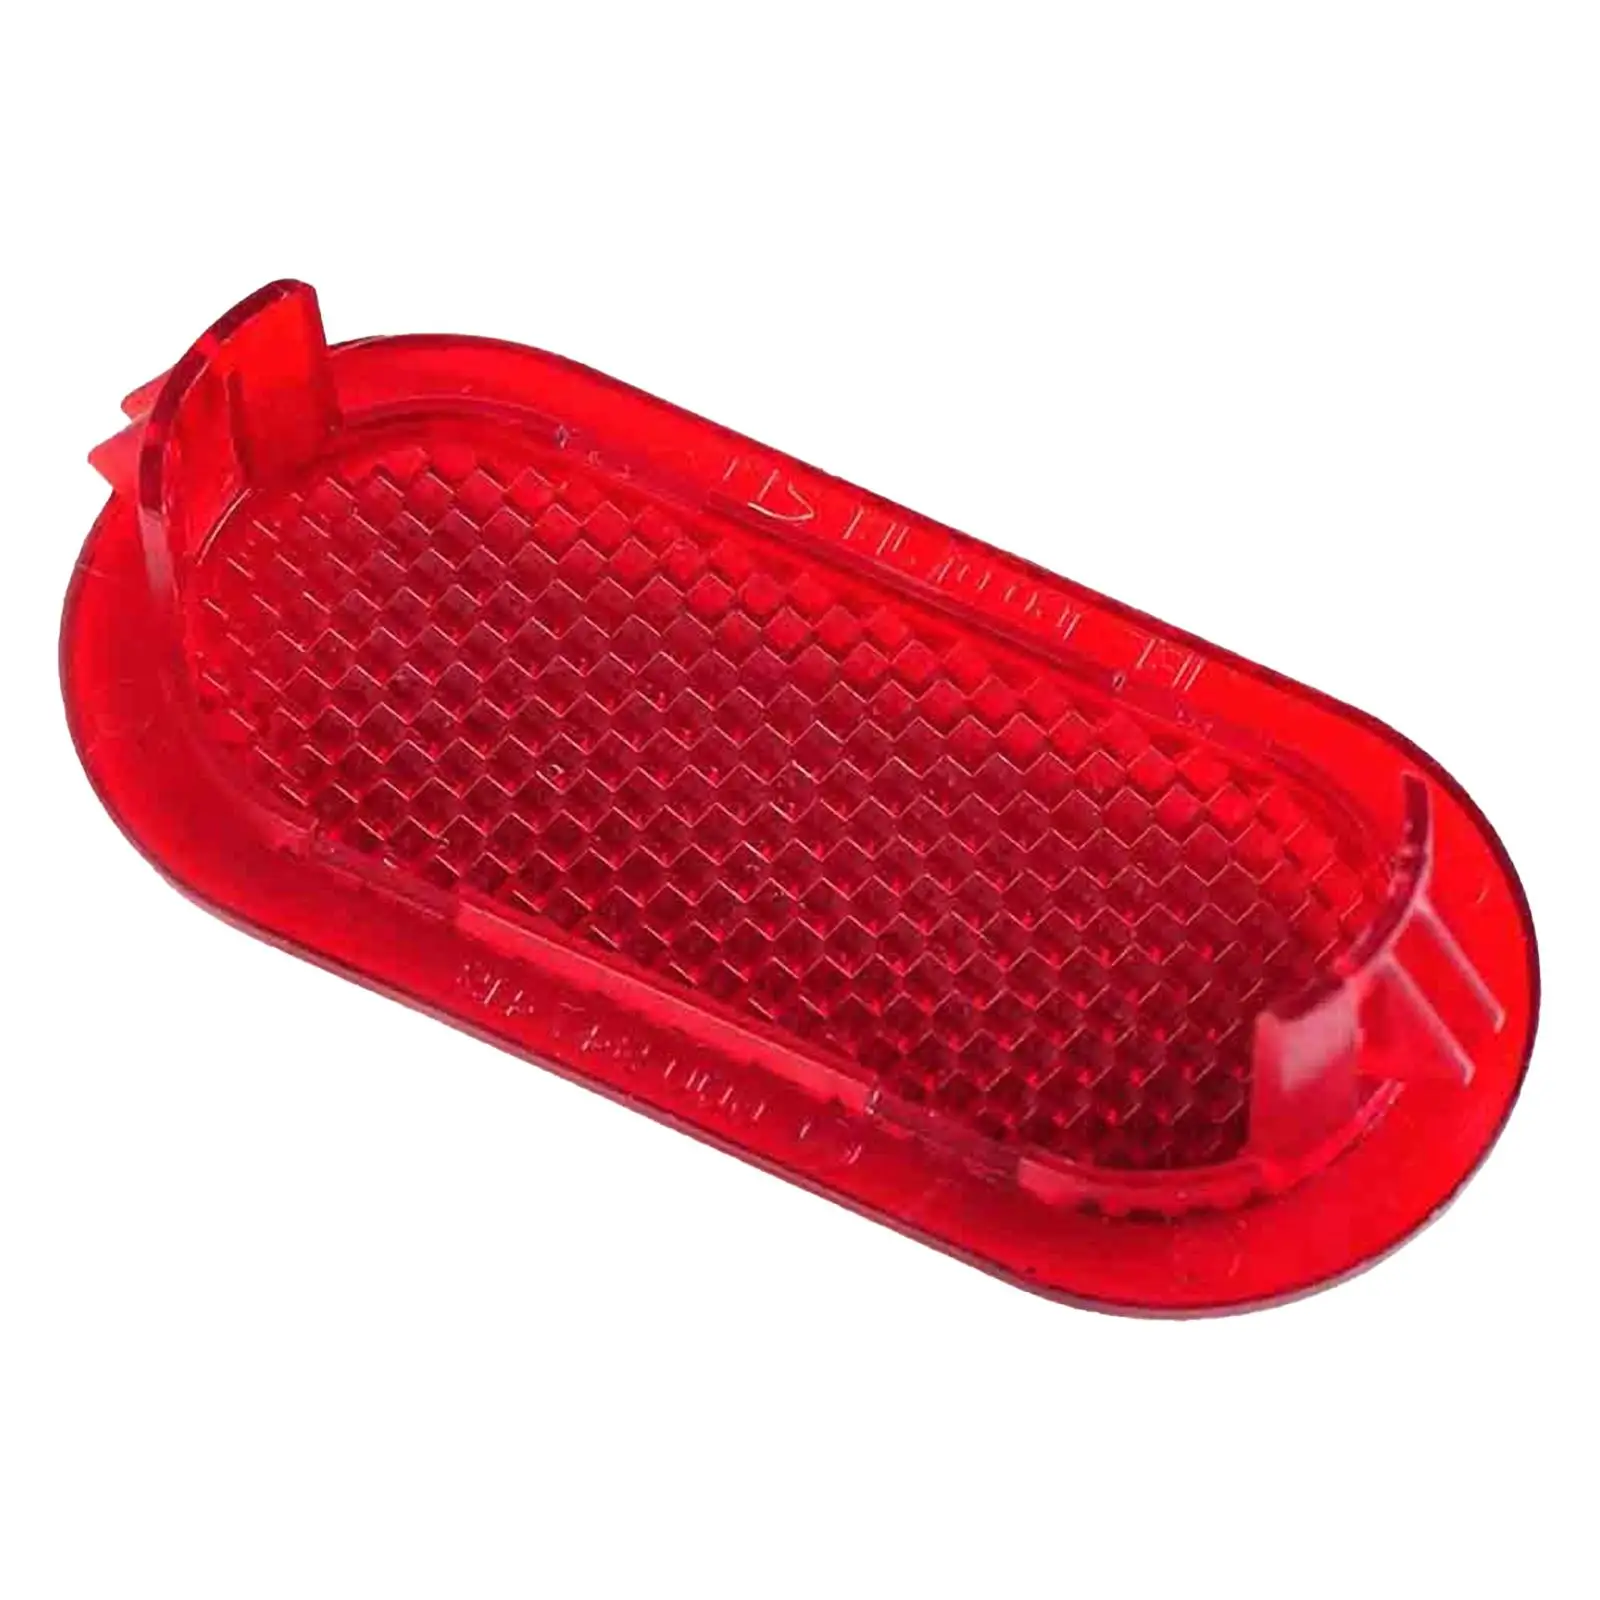 Door Panel Warning Light Reflector Red 6Q0947419 for VW Touran Touran Accessory Easy Installation